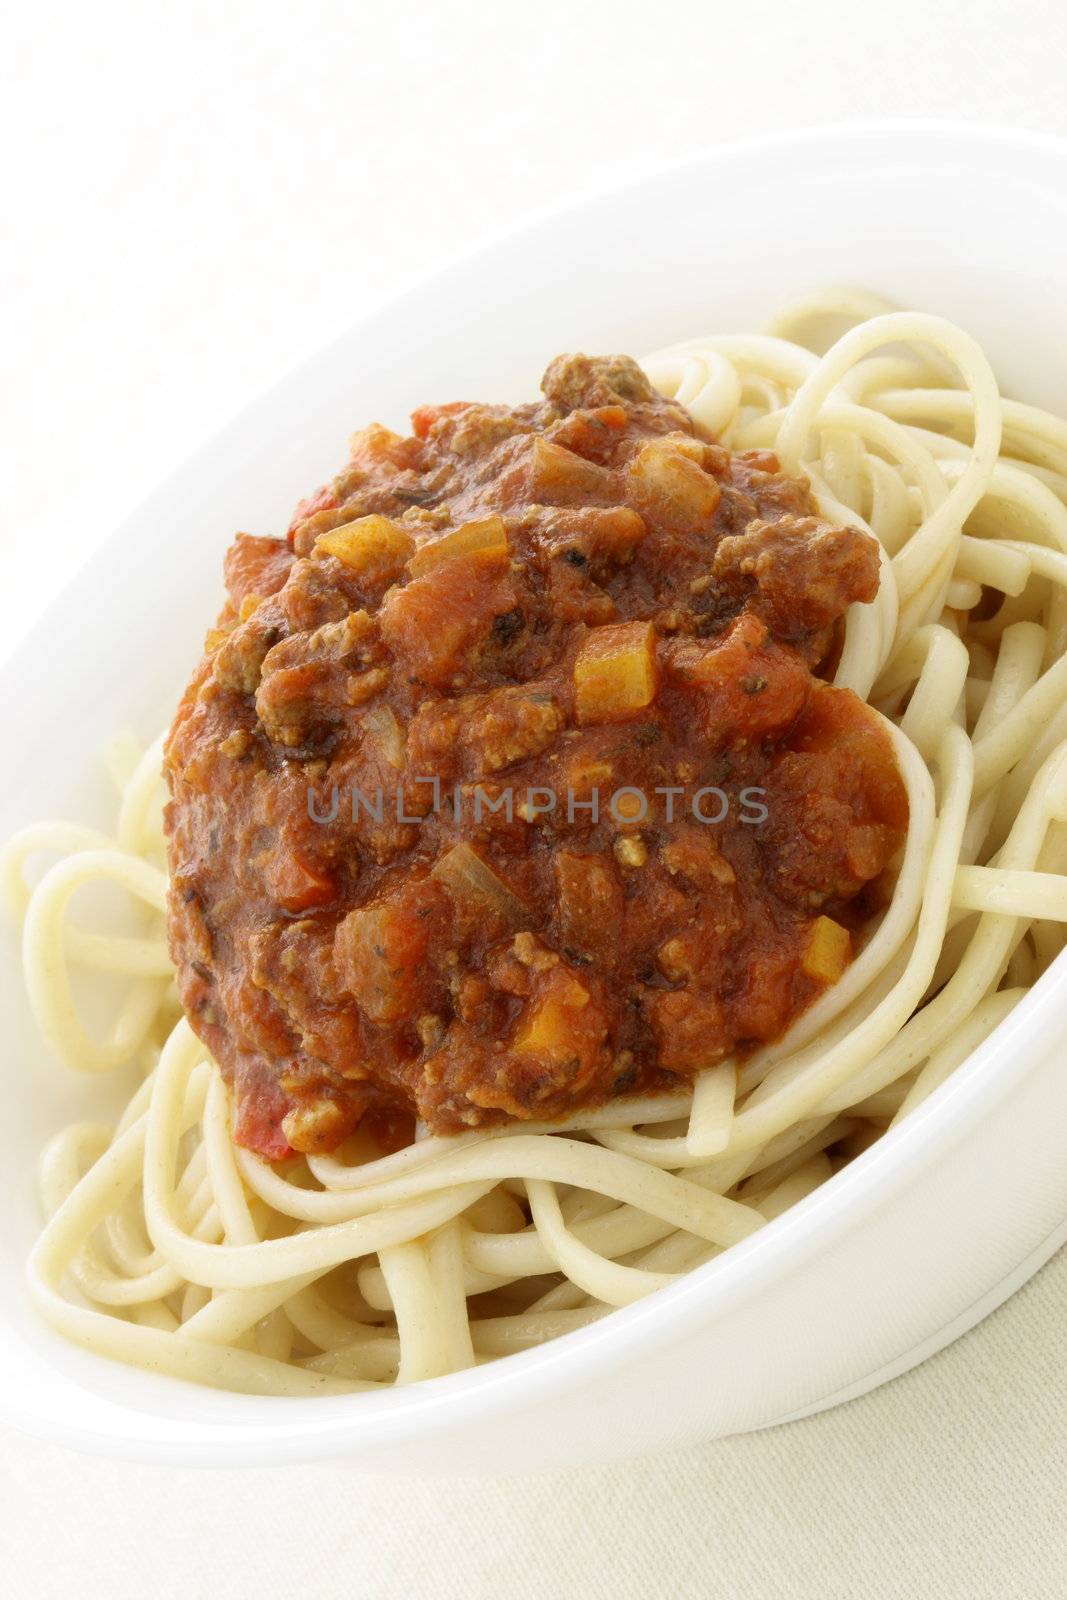 Spaghetti Bolognese delicious classic pasta recipe, with fresh chunky and delicious pasta sauce with beef, pork, lots of vegetables and tons of flavor. 